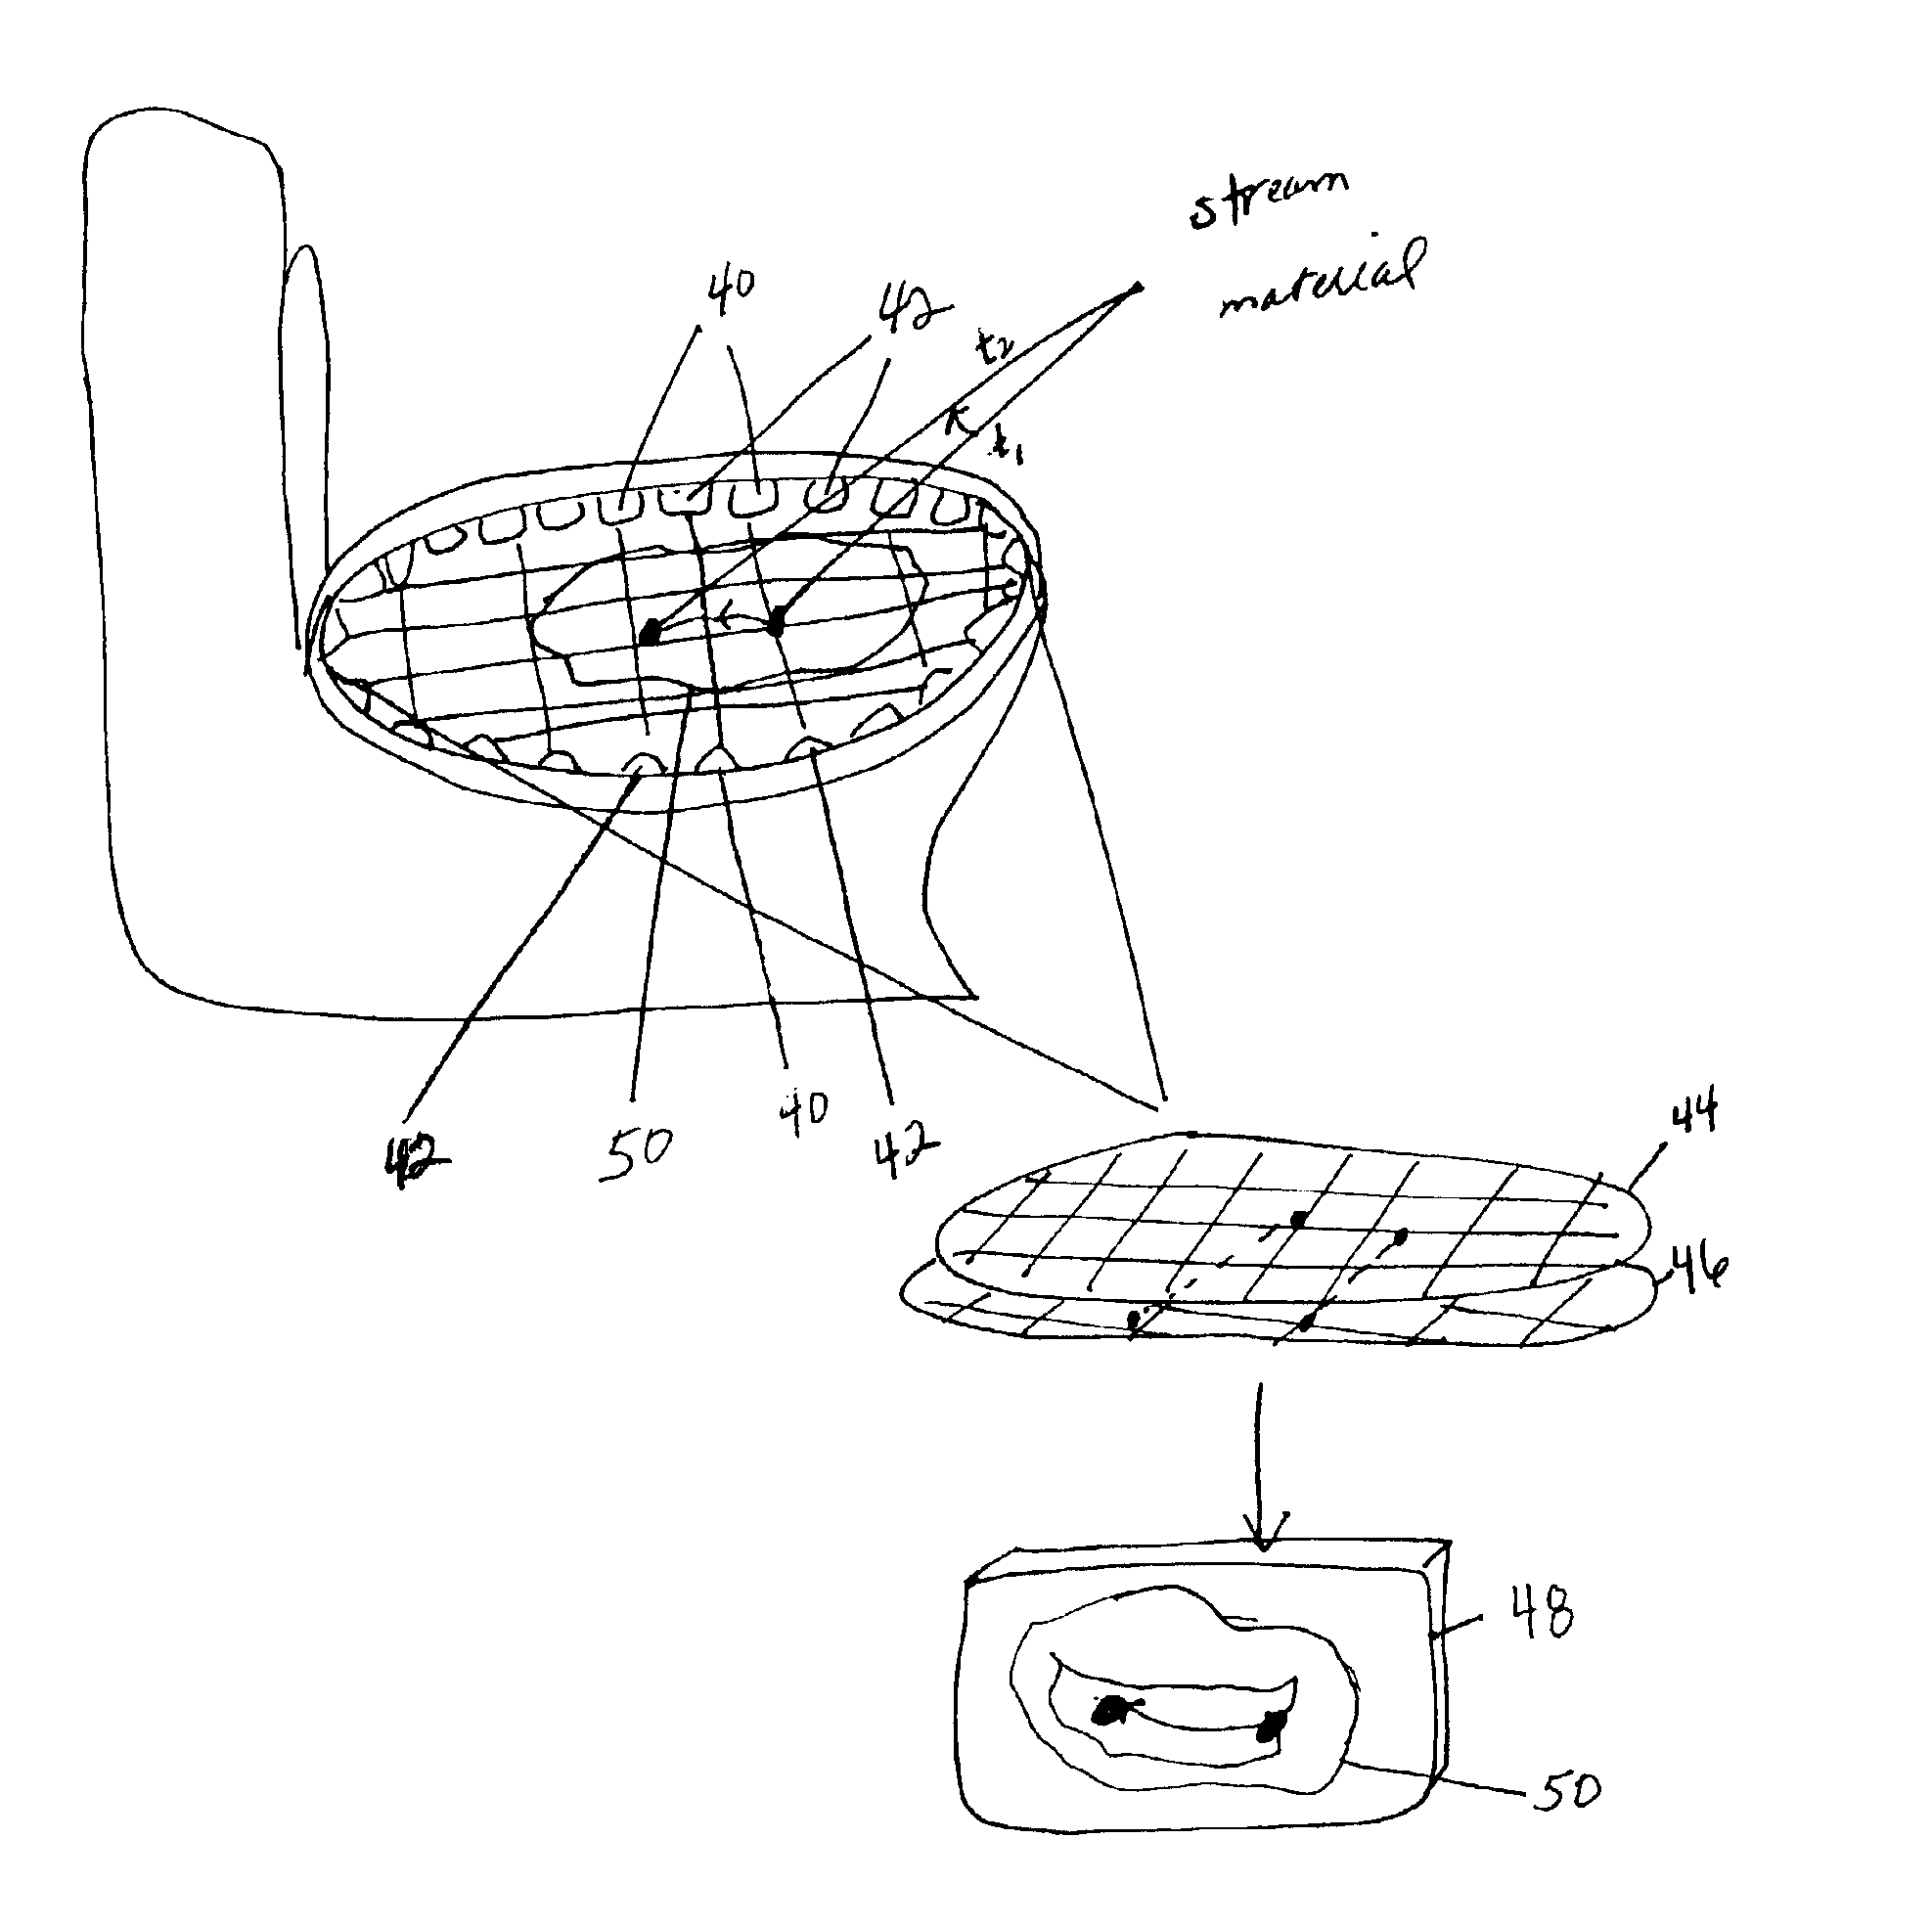 Target game apparatus and system for use with a toilet